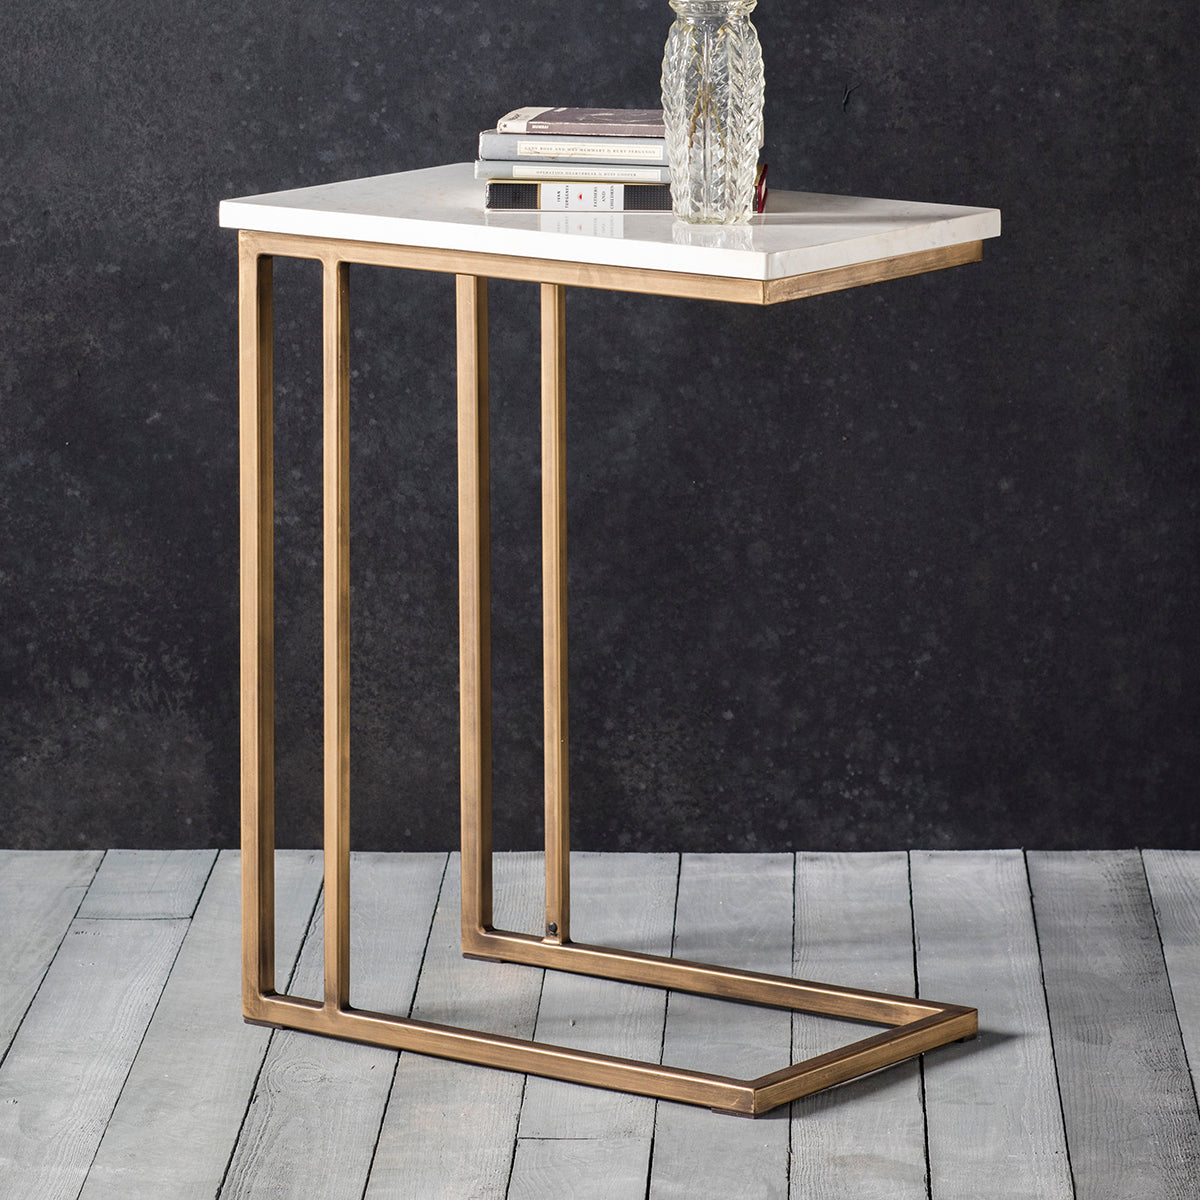 An elegant Hallsand Supper Table Marble with a gold frame and marble top, perfect for home furniture and interior decor.